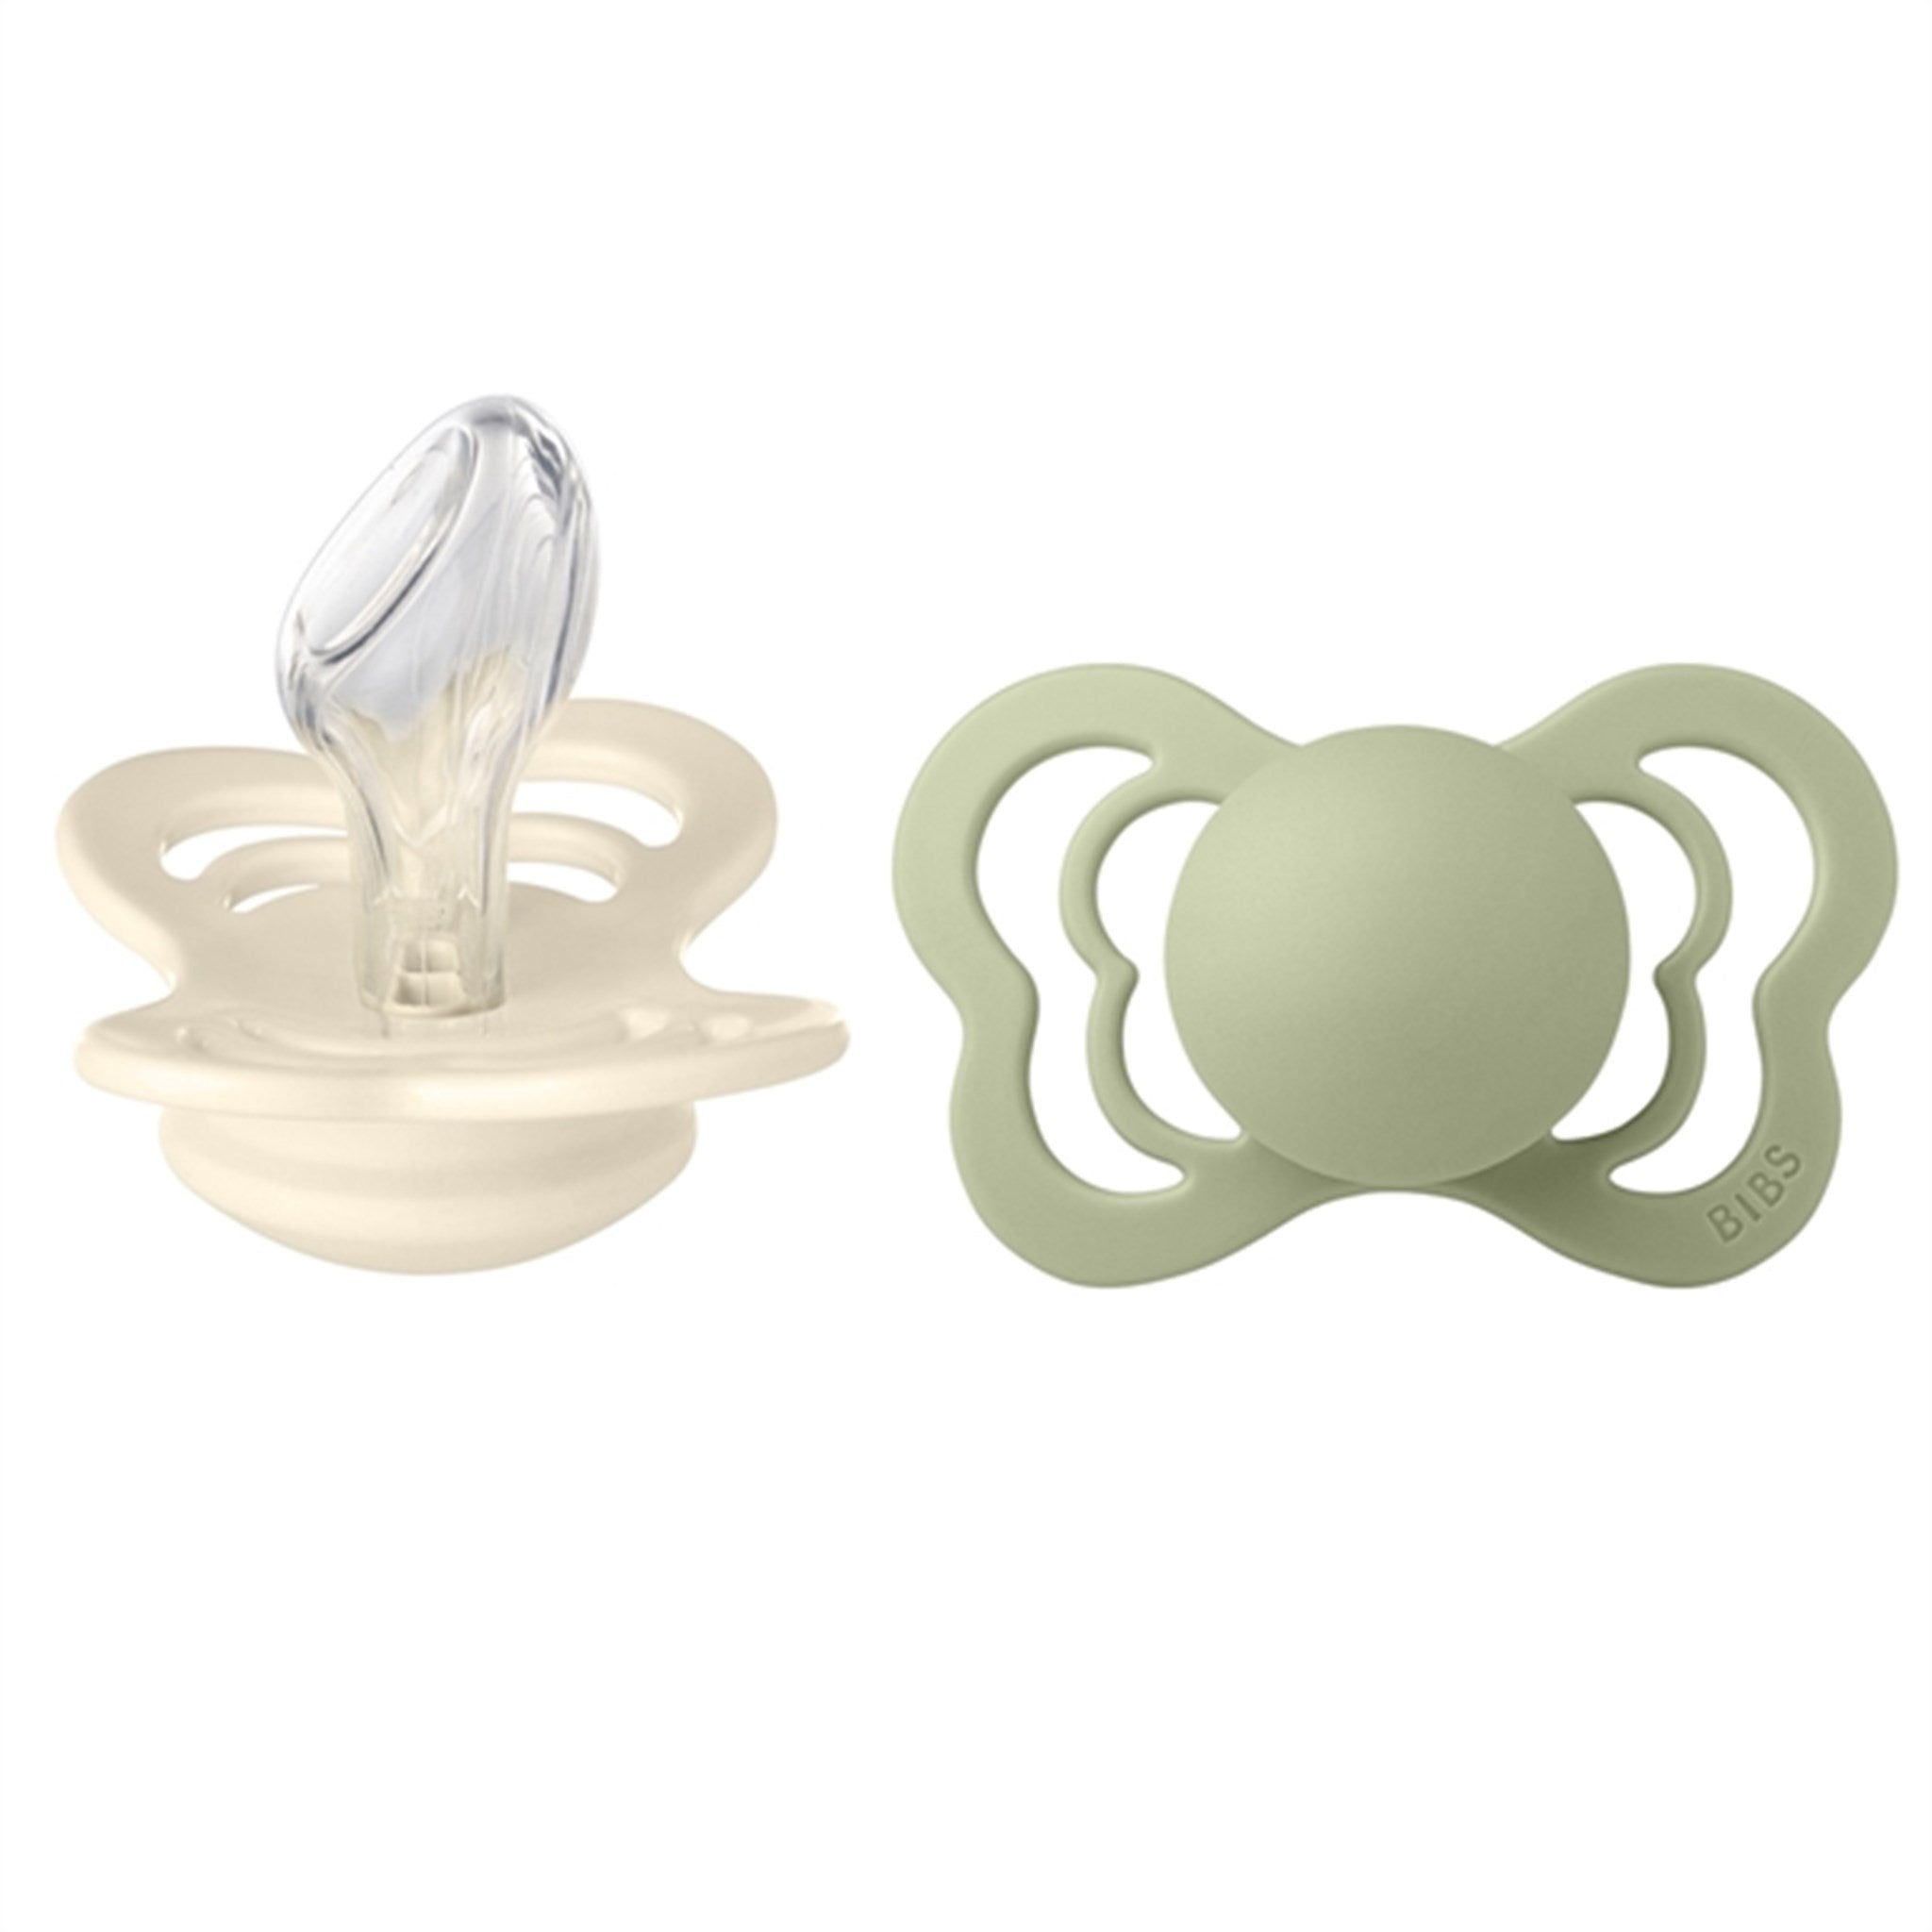 Bibs Couture Silikone Pacifiers 2-pack Anatomical Ivory/Sage